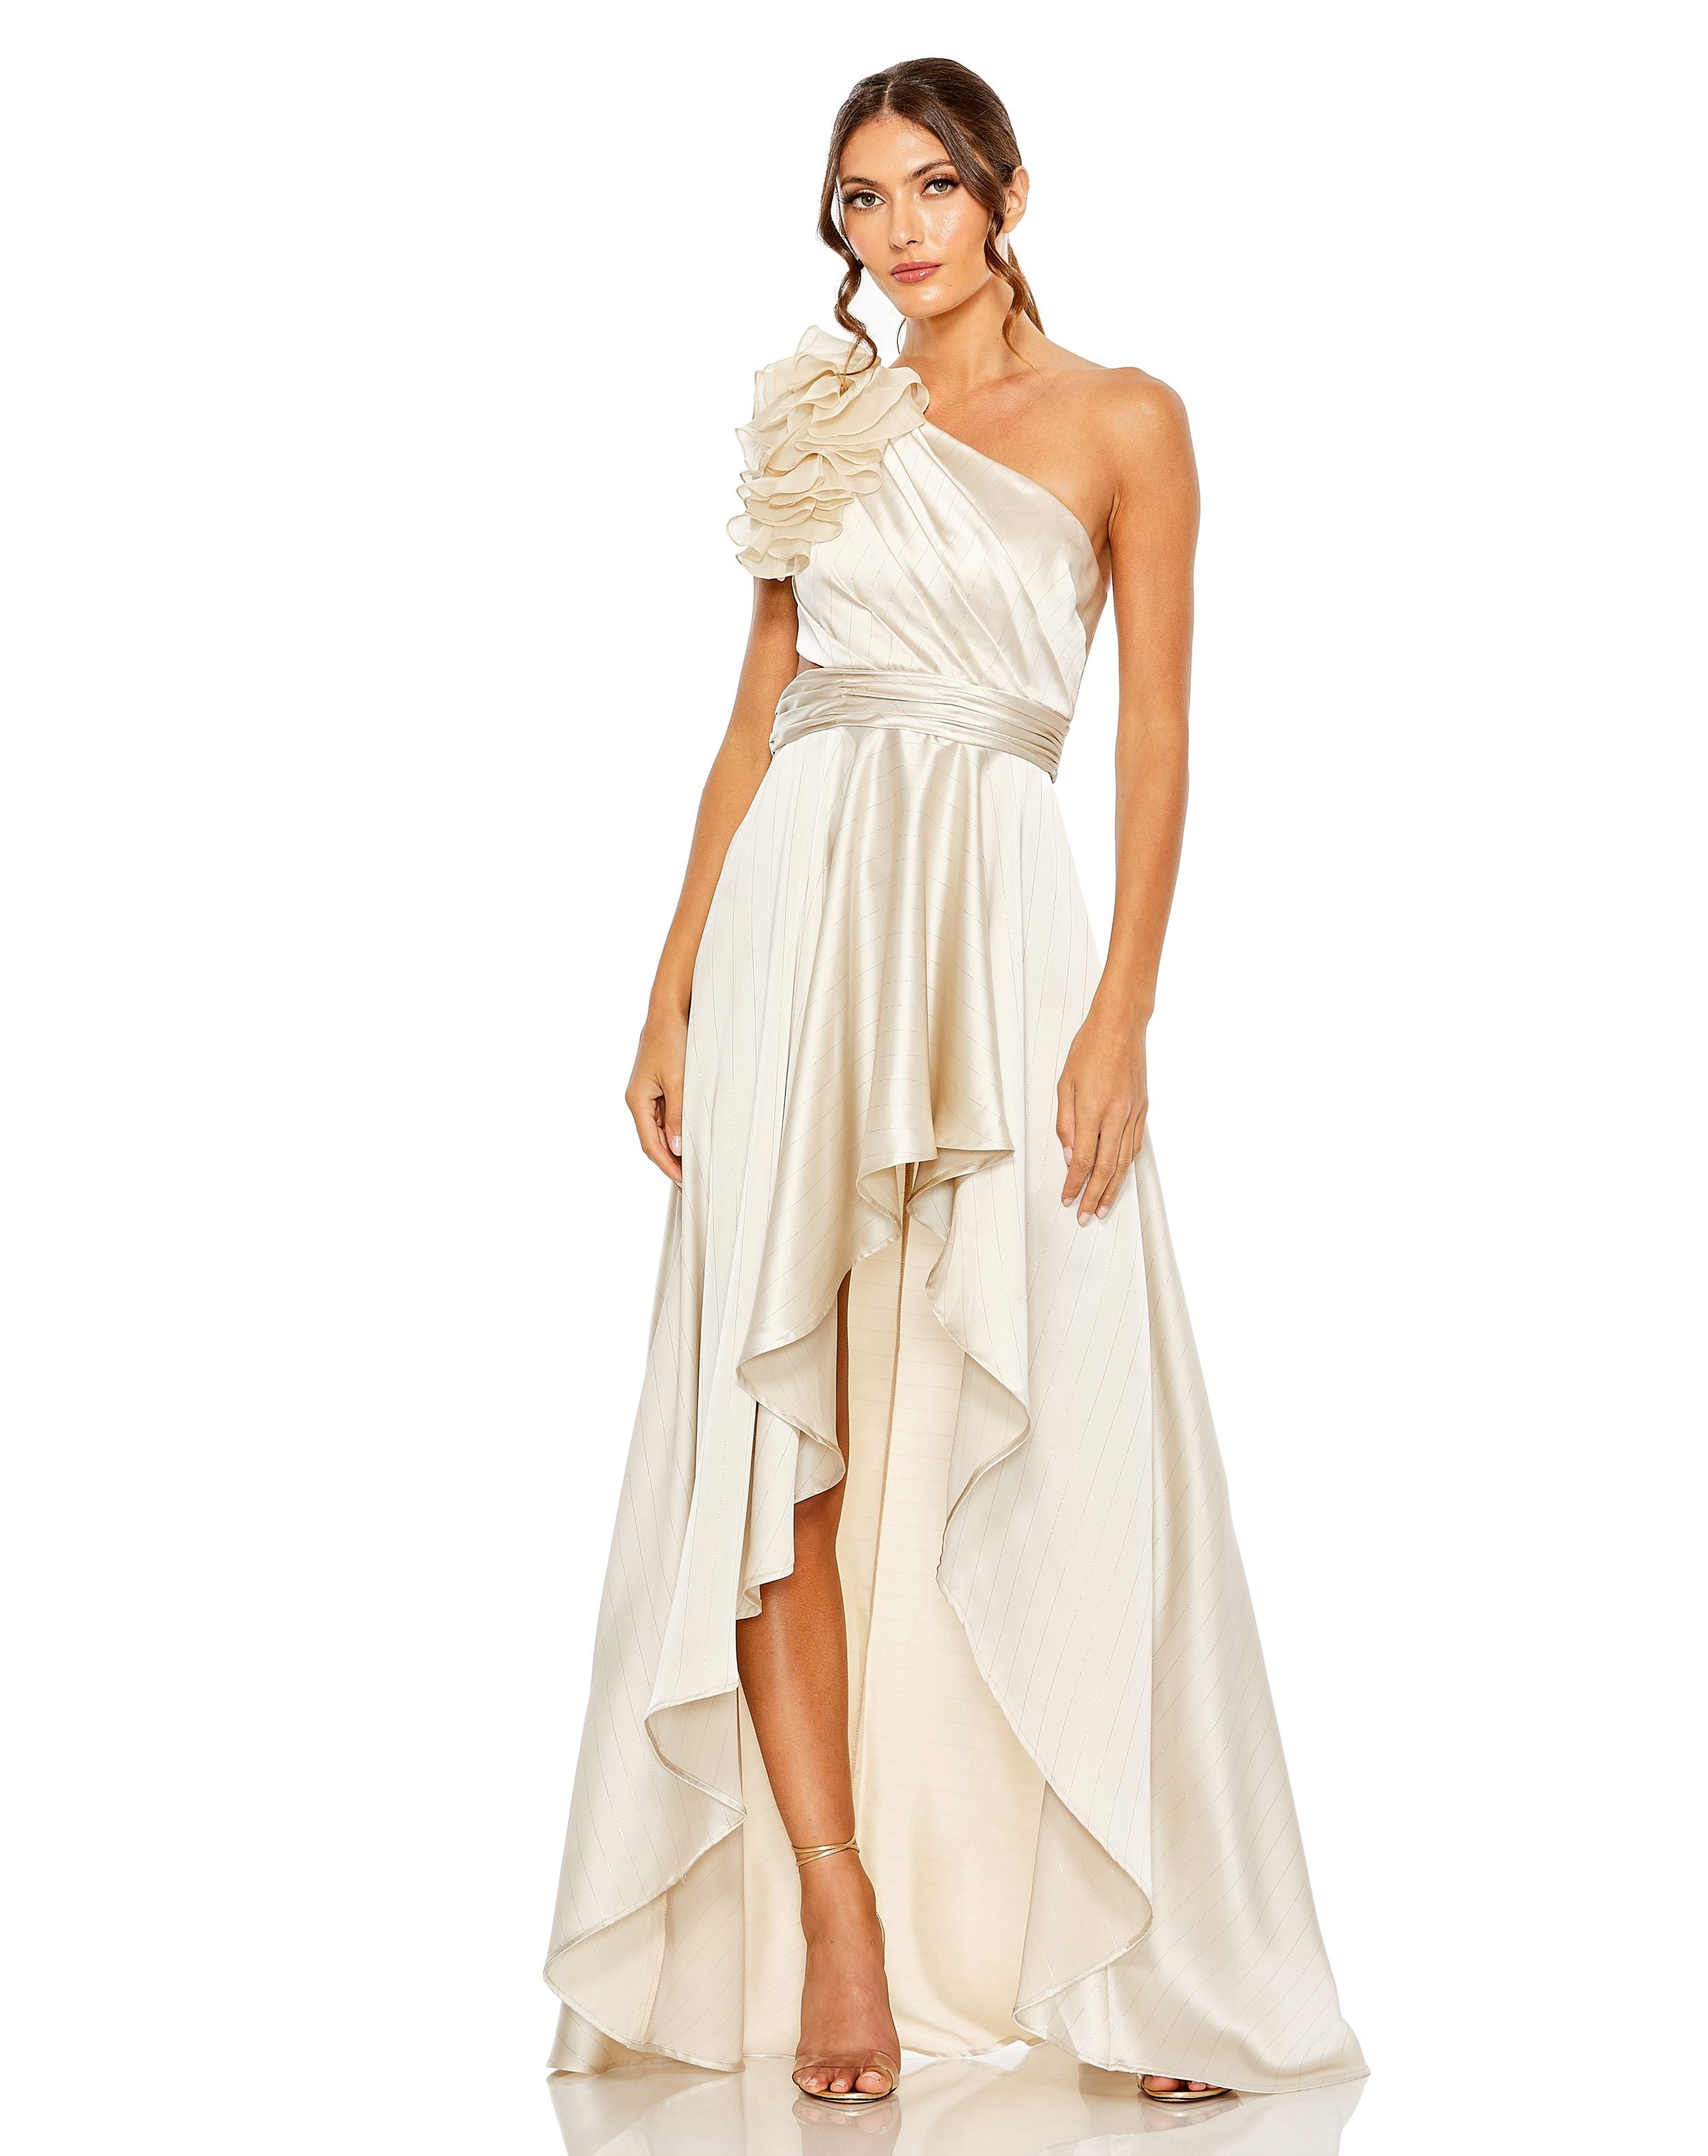 Ruffled One Shoulder Cut Out Hi-Lo Gown